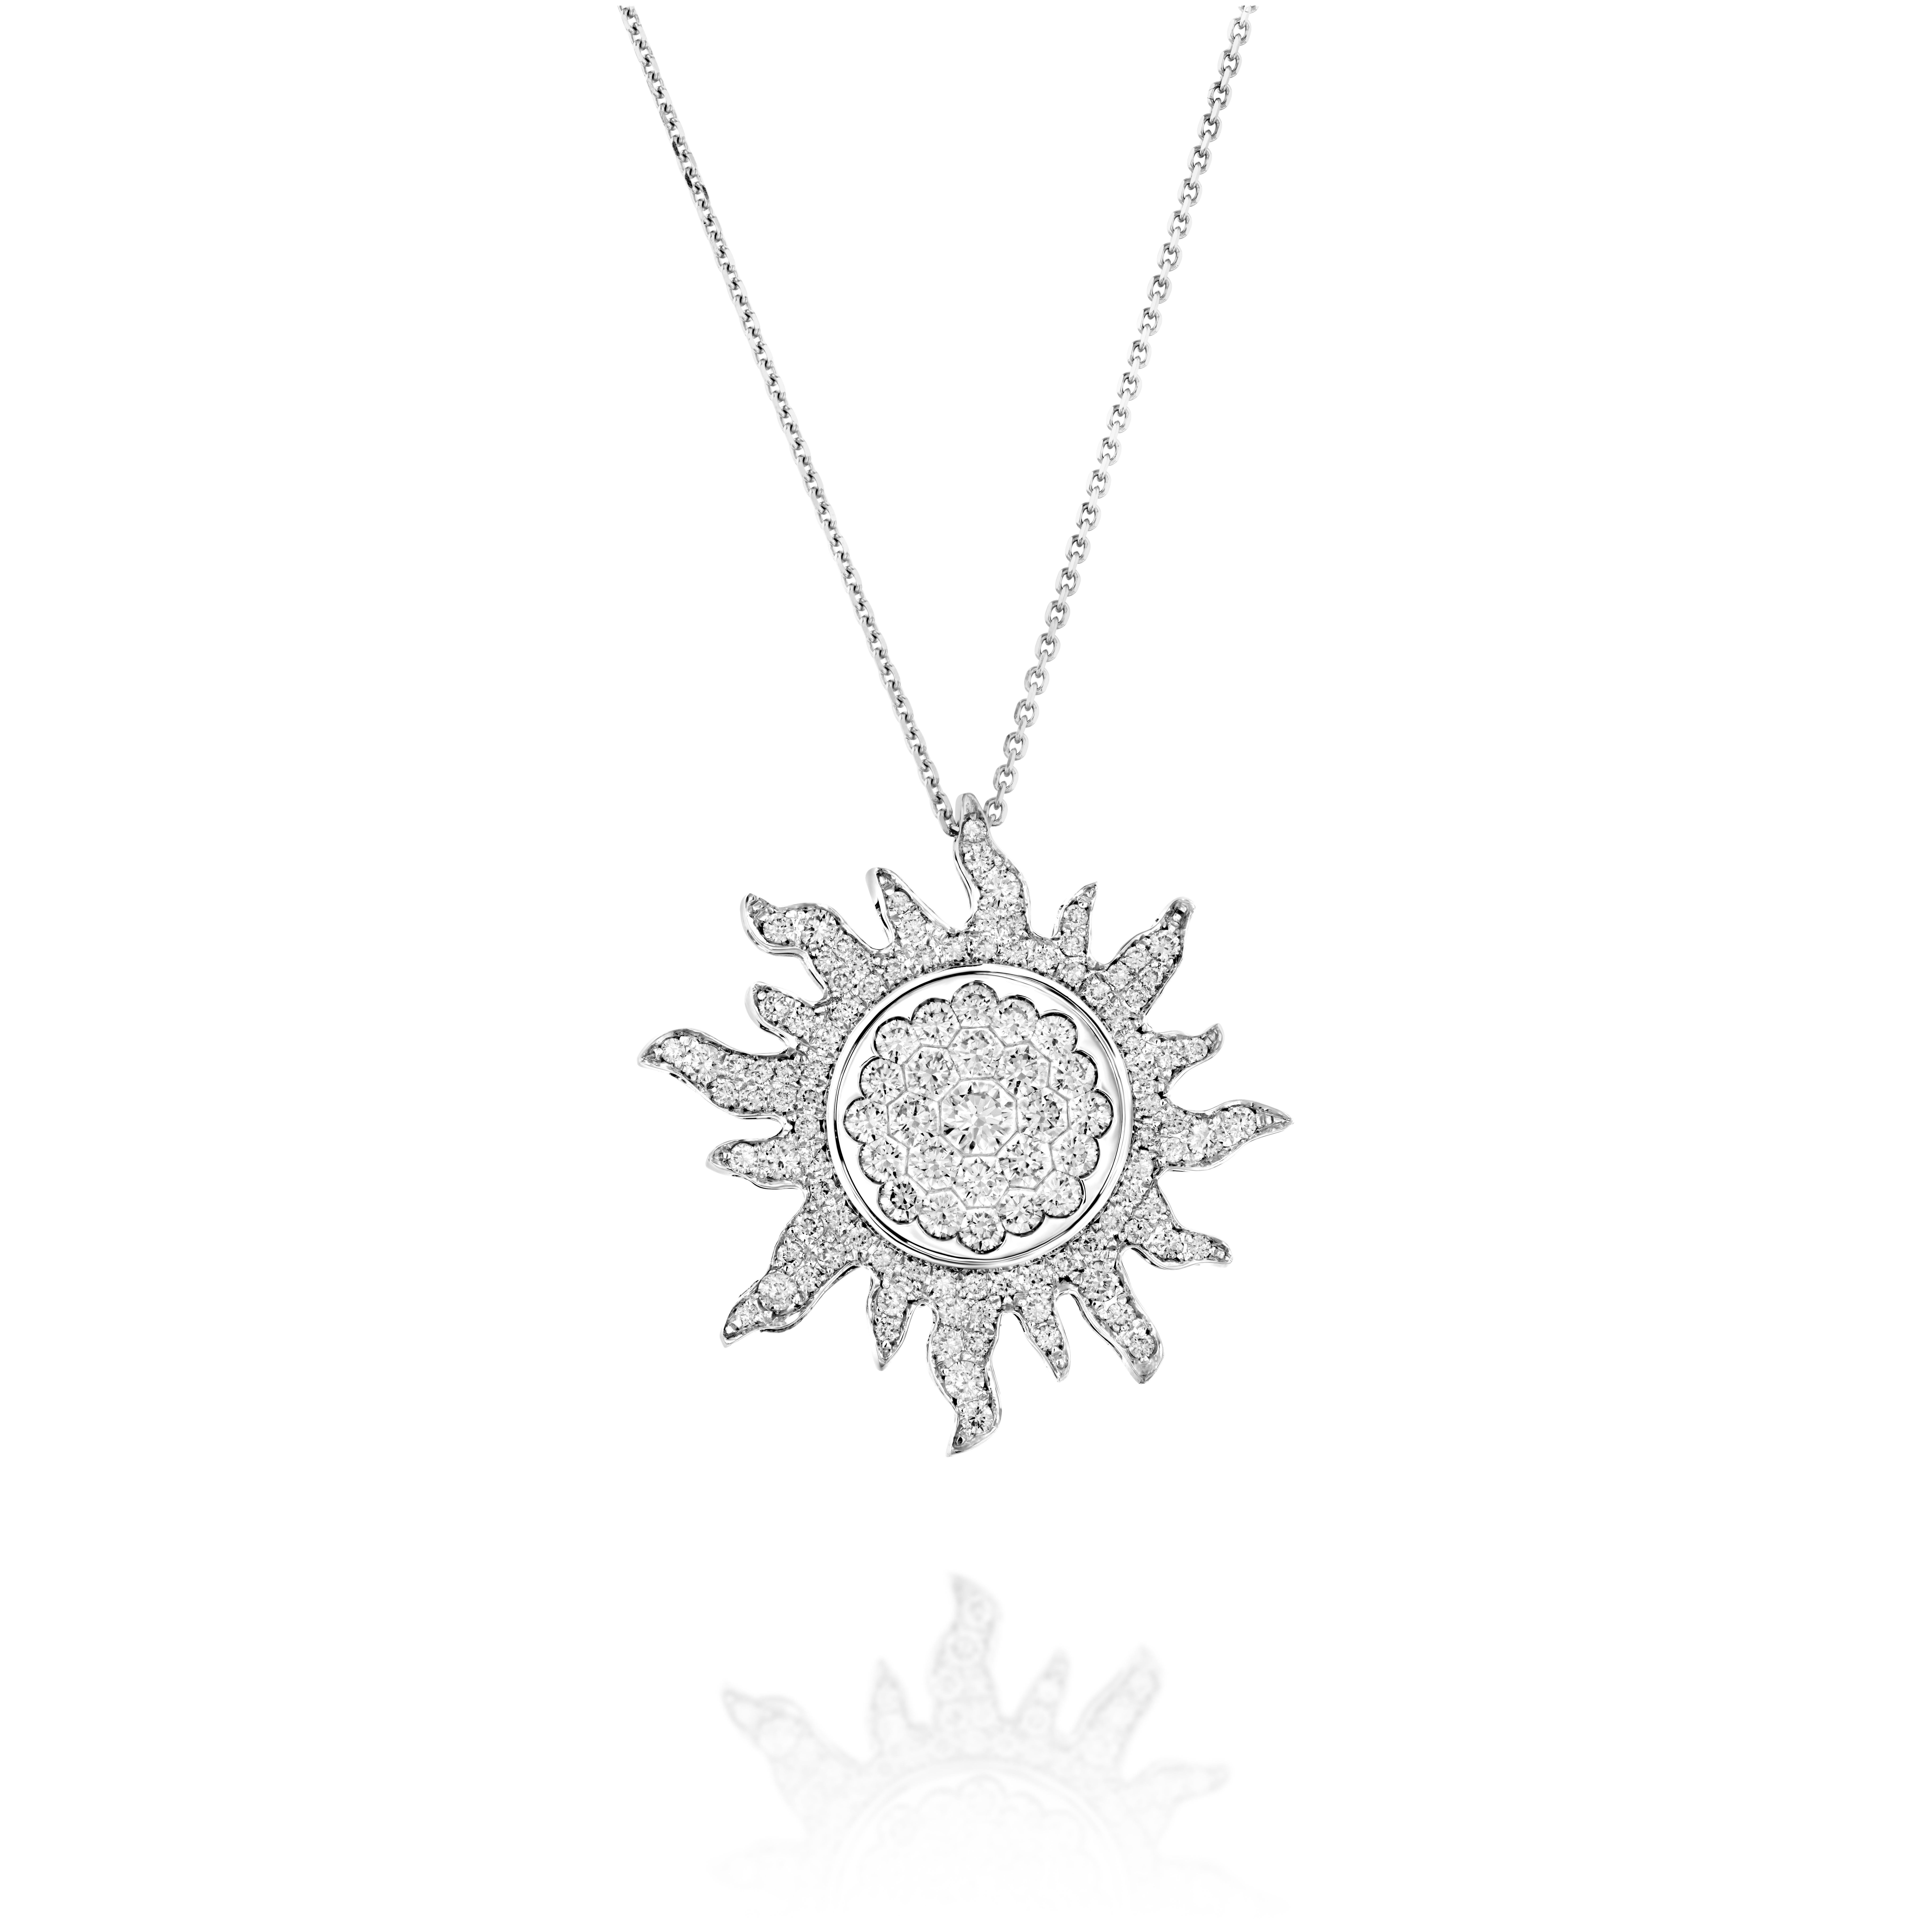 Experience the ultimate luxury with the Geraldo 2.22 Carat Diamond White Gold Invisible Setting Sunburst Pendant, a stunning masterpiece of jewelry design. This pendant features a unique sunburst design that expertly showcases the highest quality